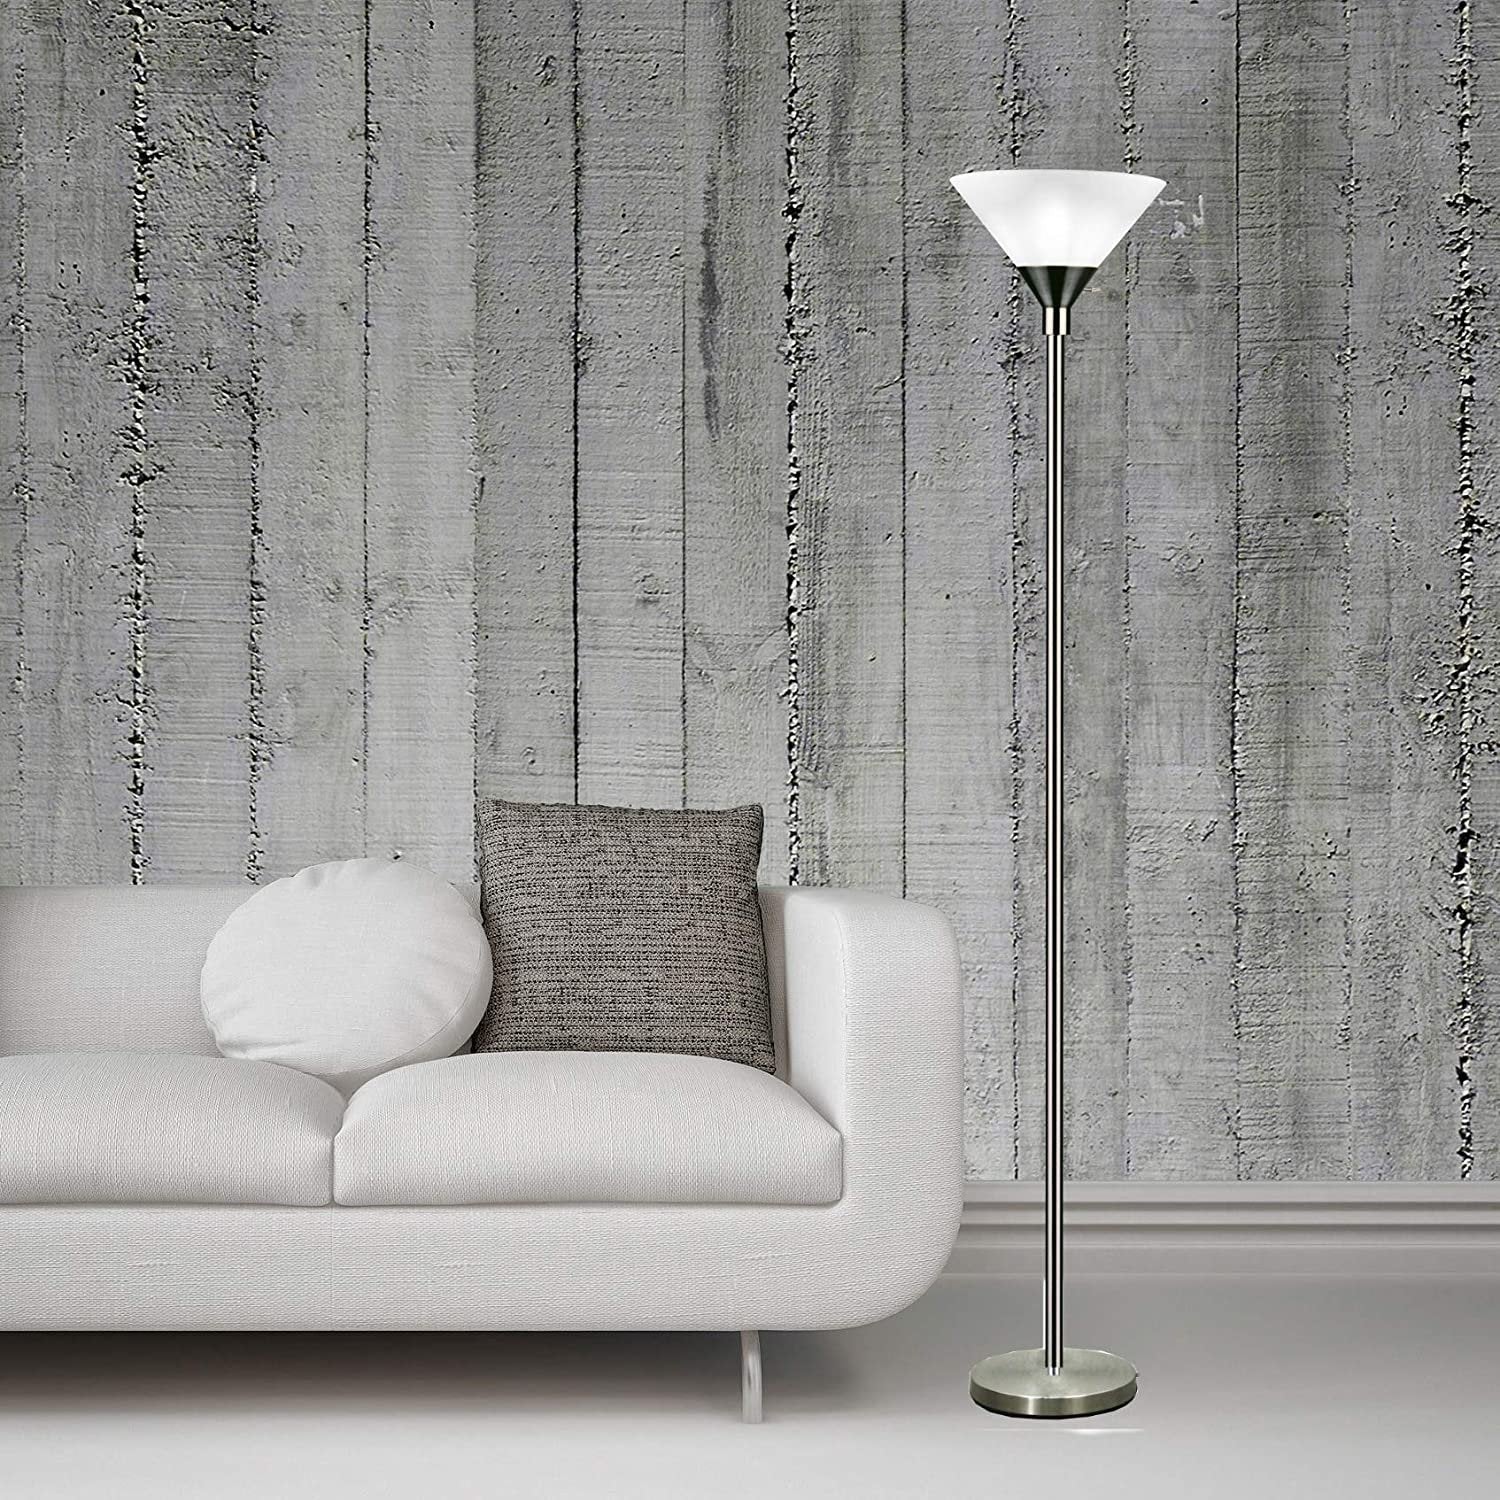 Light Accents - Metro Torchiere Modern Floor Lamp Brushed Nickel